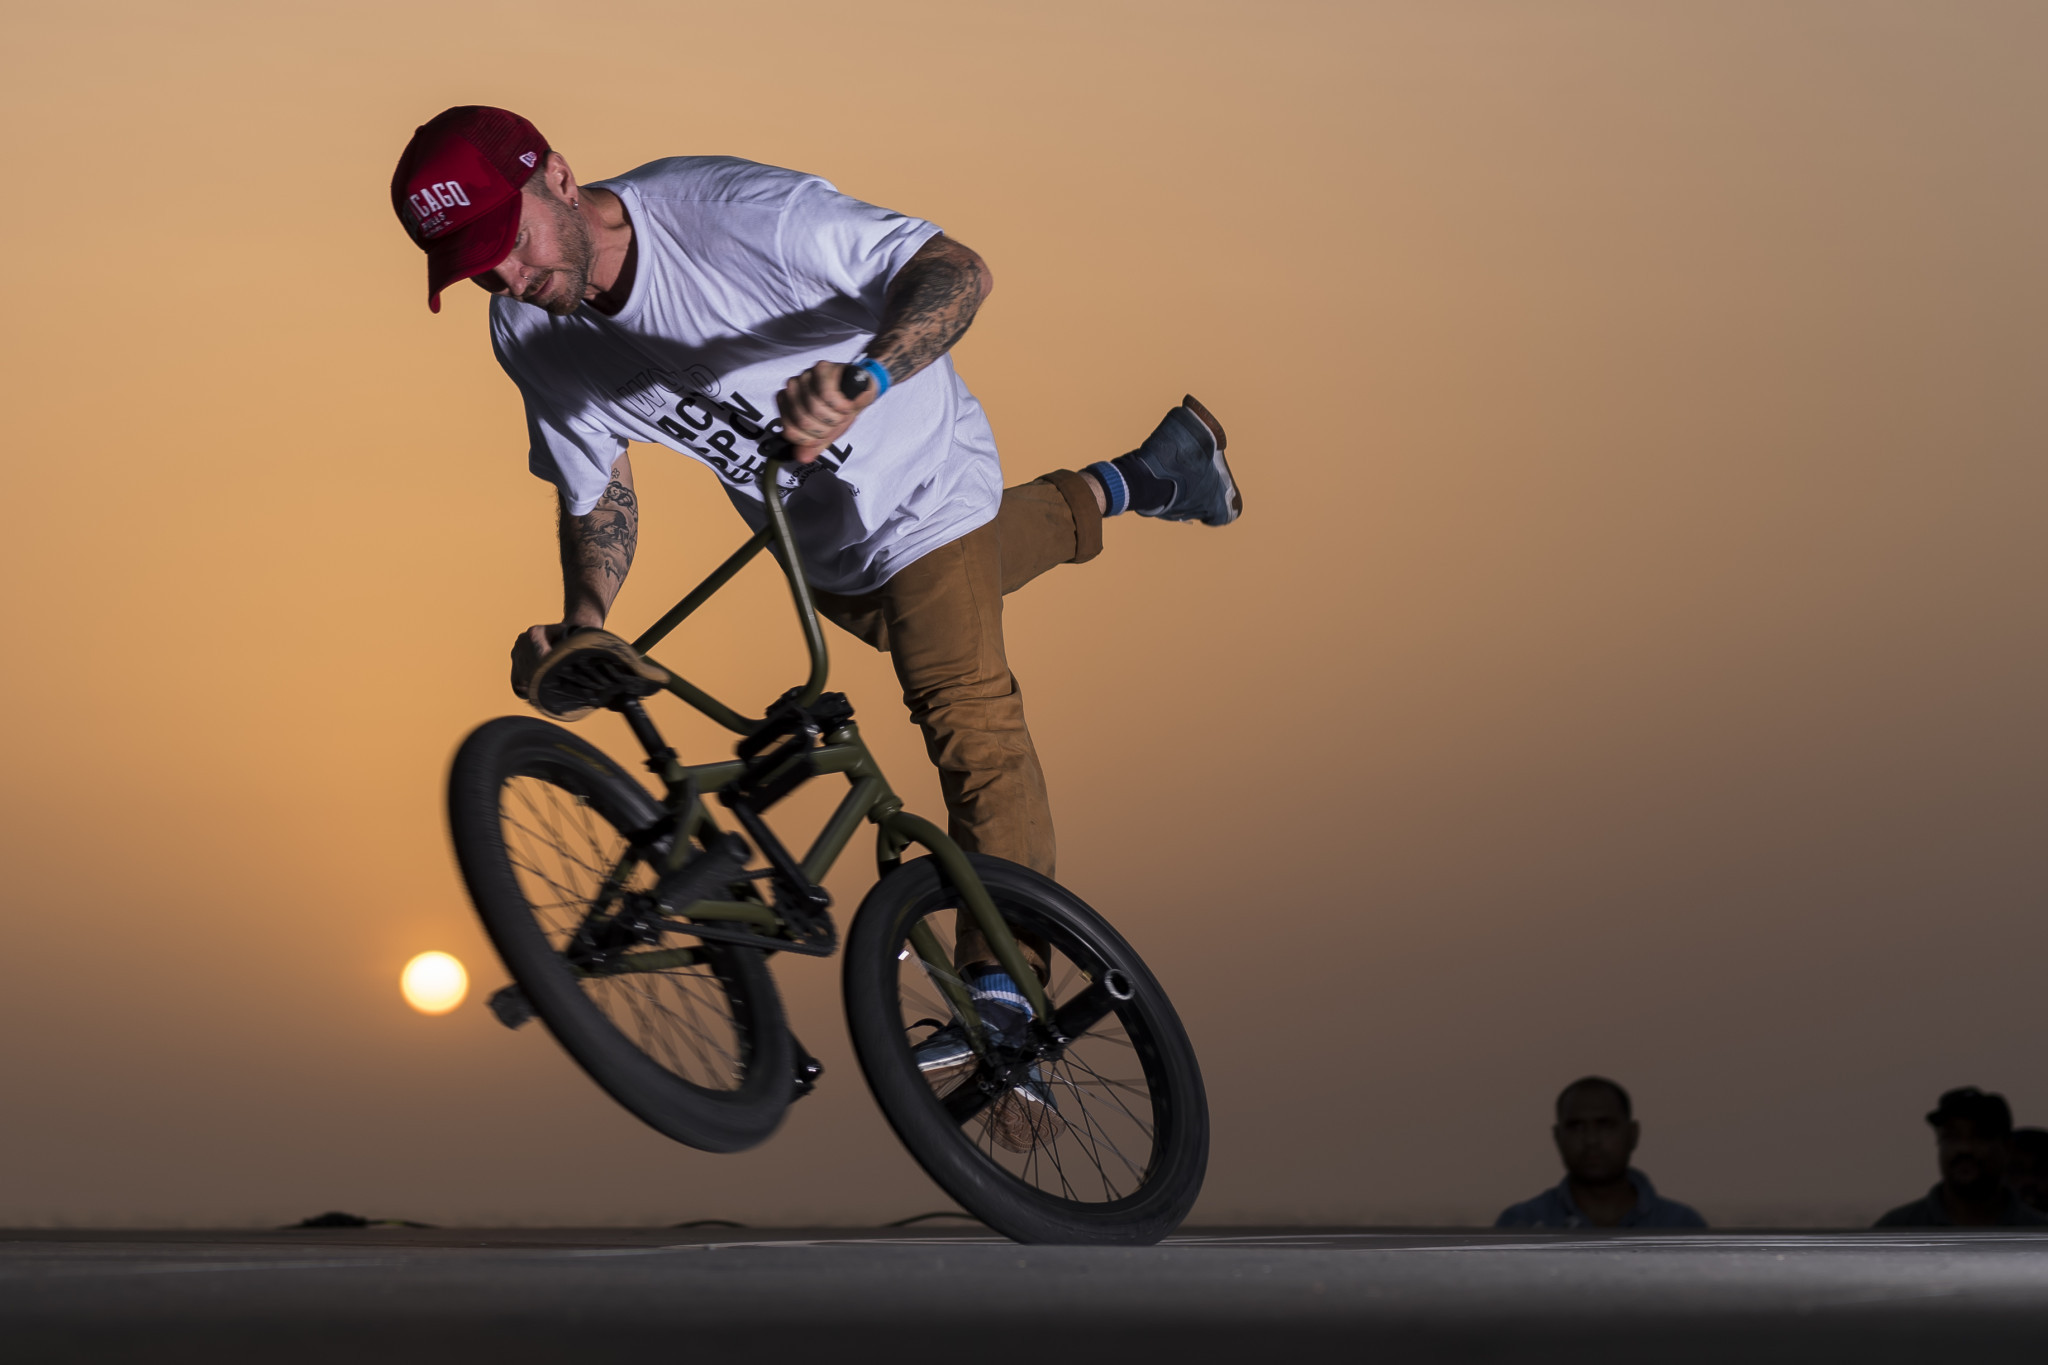 Four-time BMX flatland world champion Alex Jumelin topped qualifying at the FISE Battle of the Champions in Saudi Arabia ©Getty Images